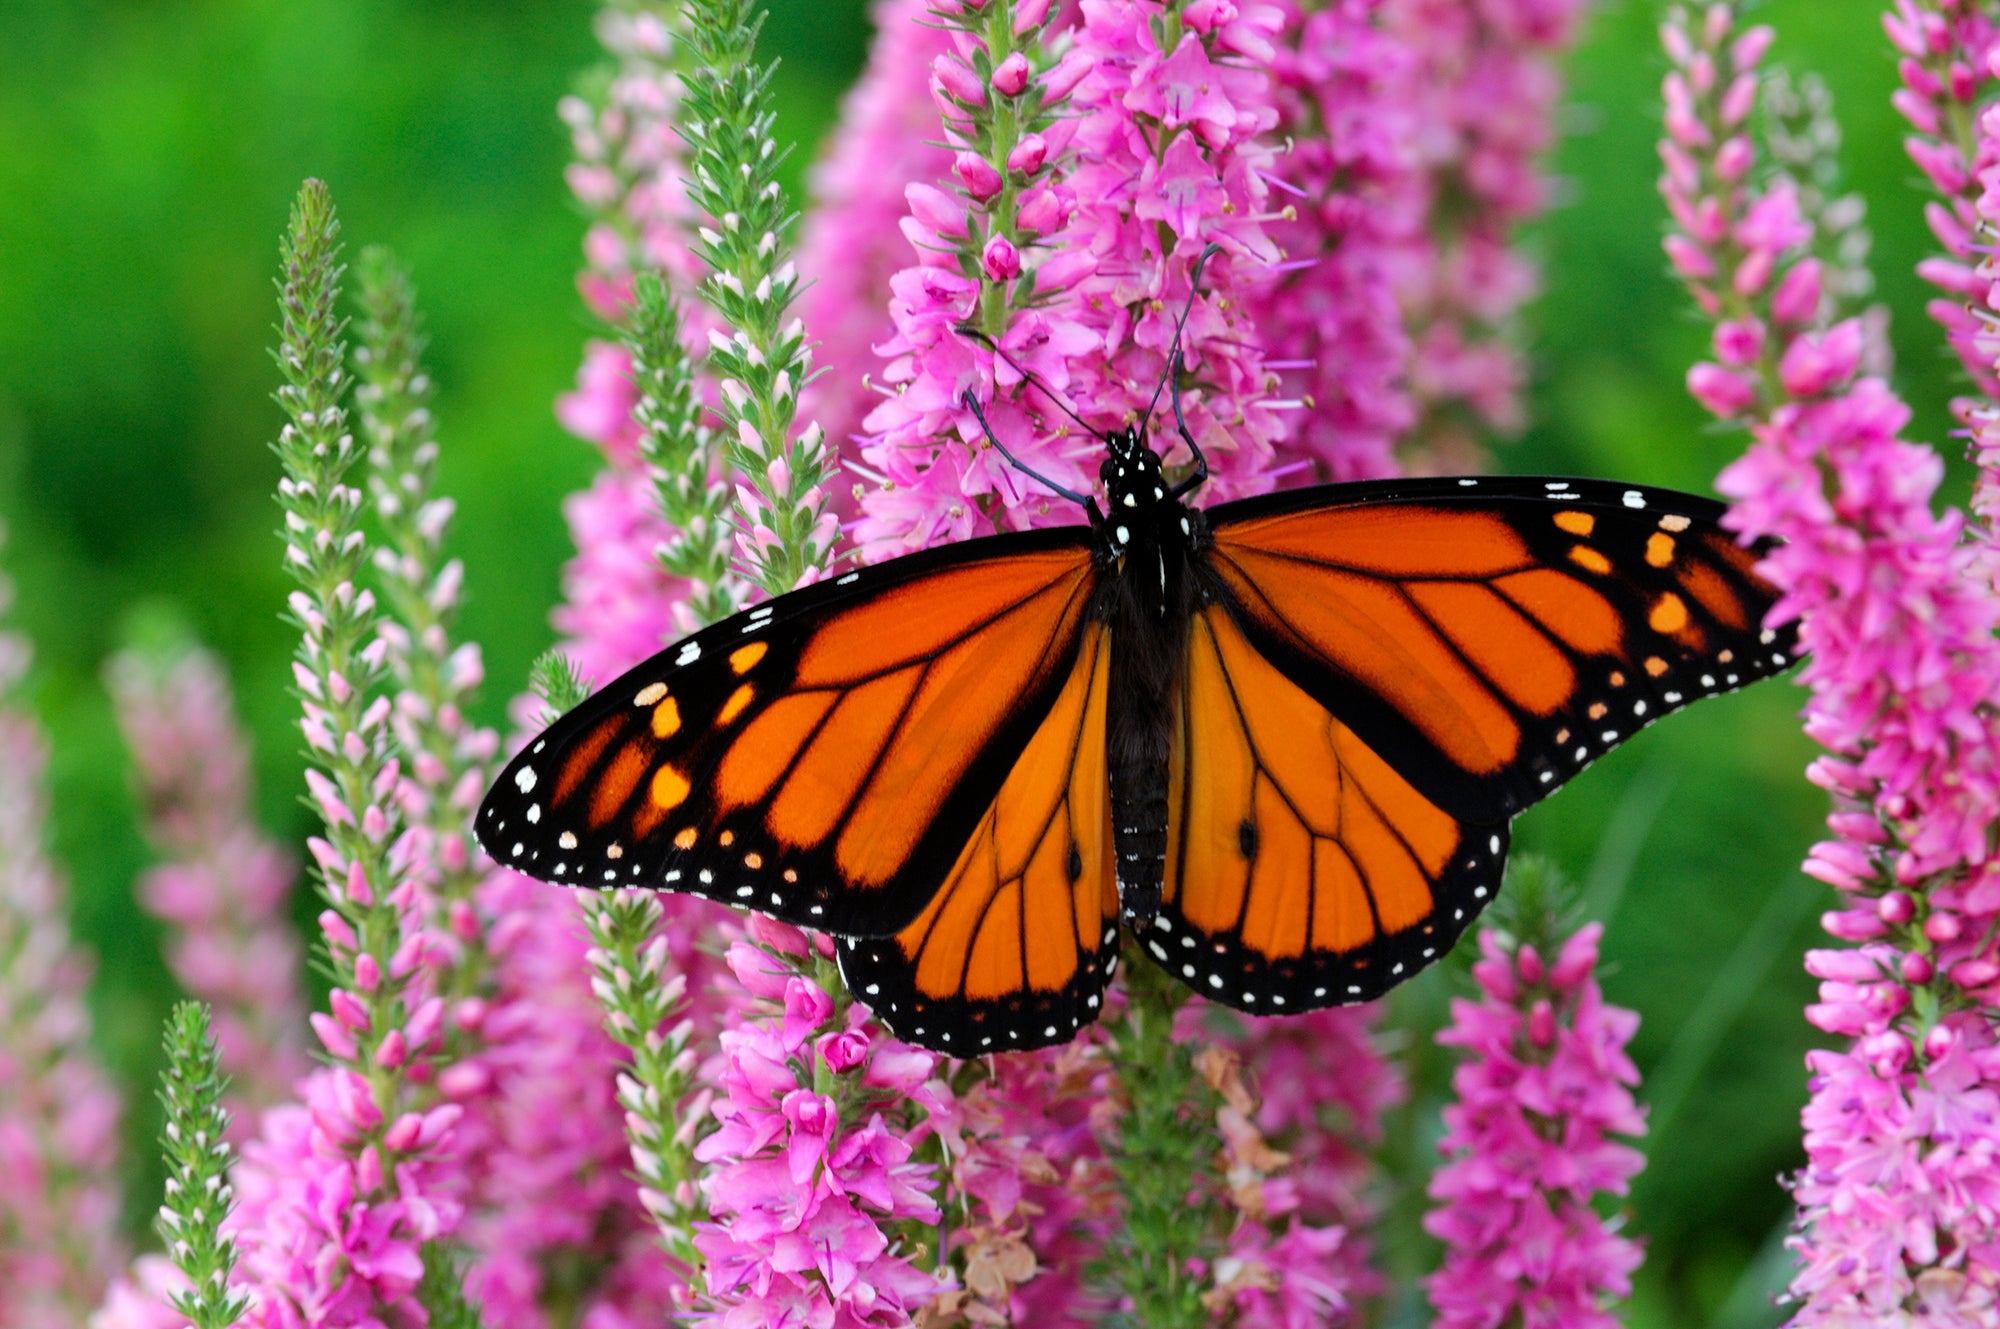 A monarch butterfly sitting on flowers. End of image description.